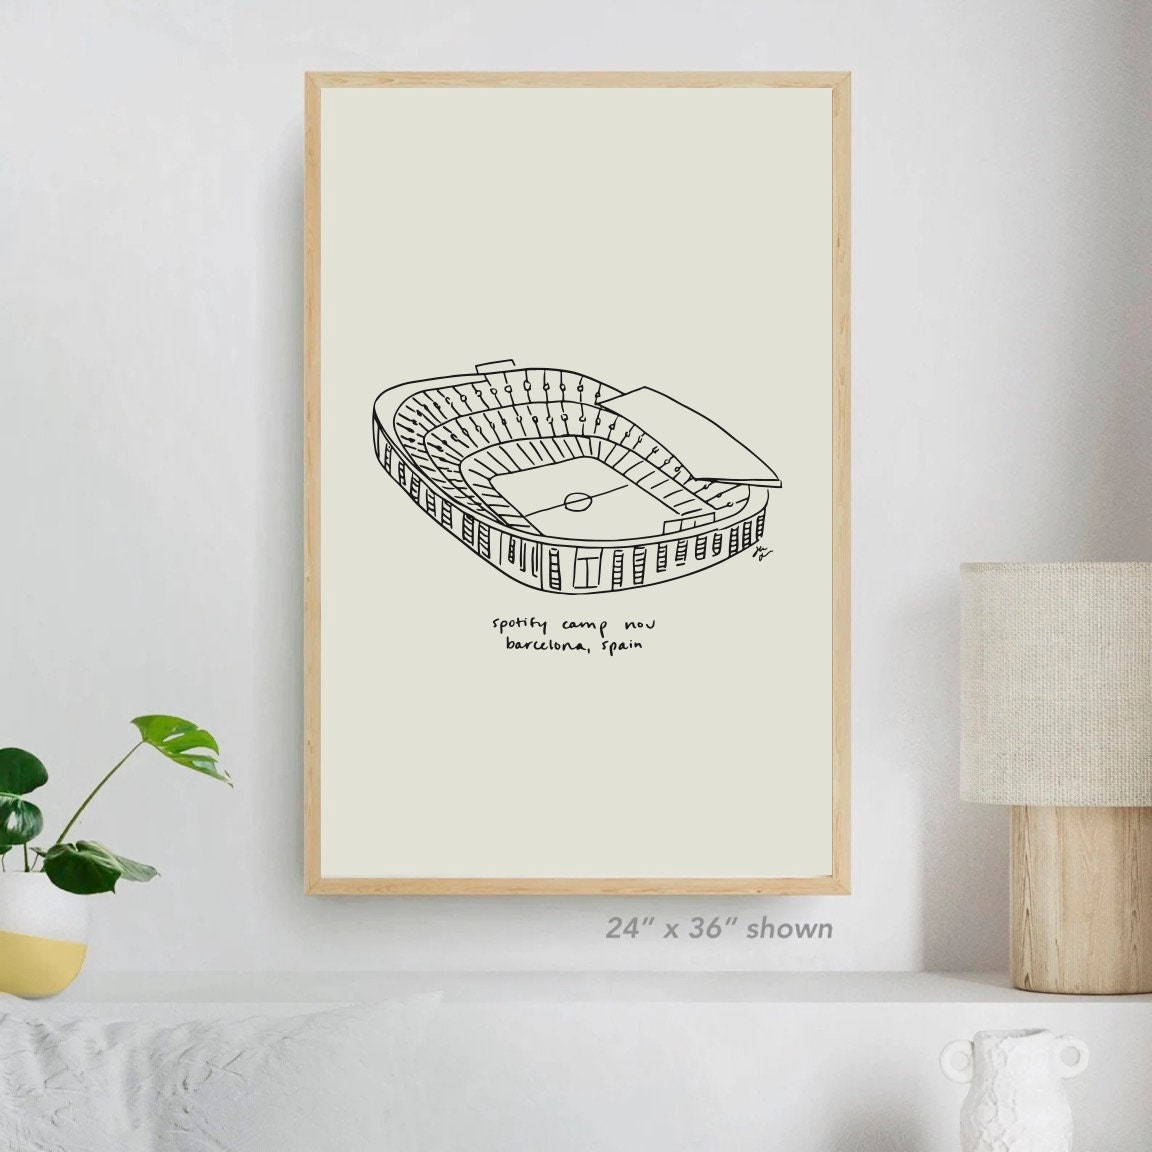 Spotify Camp Nou Barcelona Spain Soccer Stadium, La Liga Club FC Barcelona  Fan, La Liga Club FC Fan Poster Painting Spain, Camp Nou Drawing - Etsy